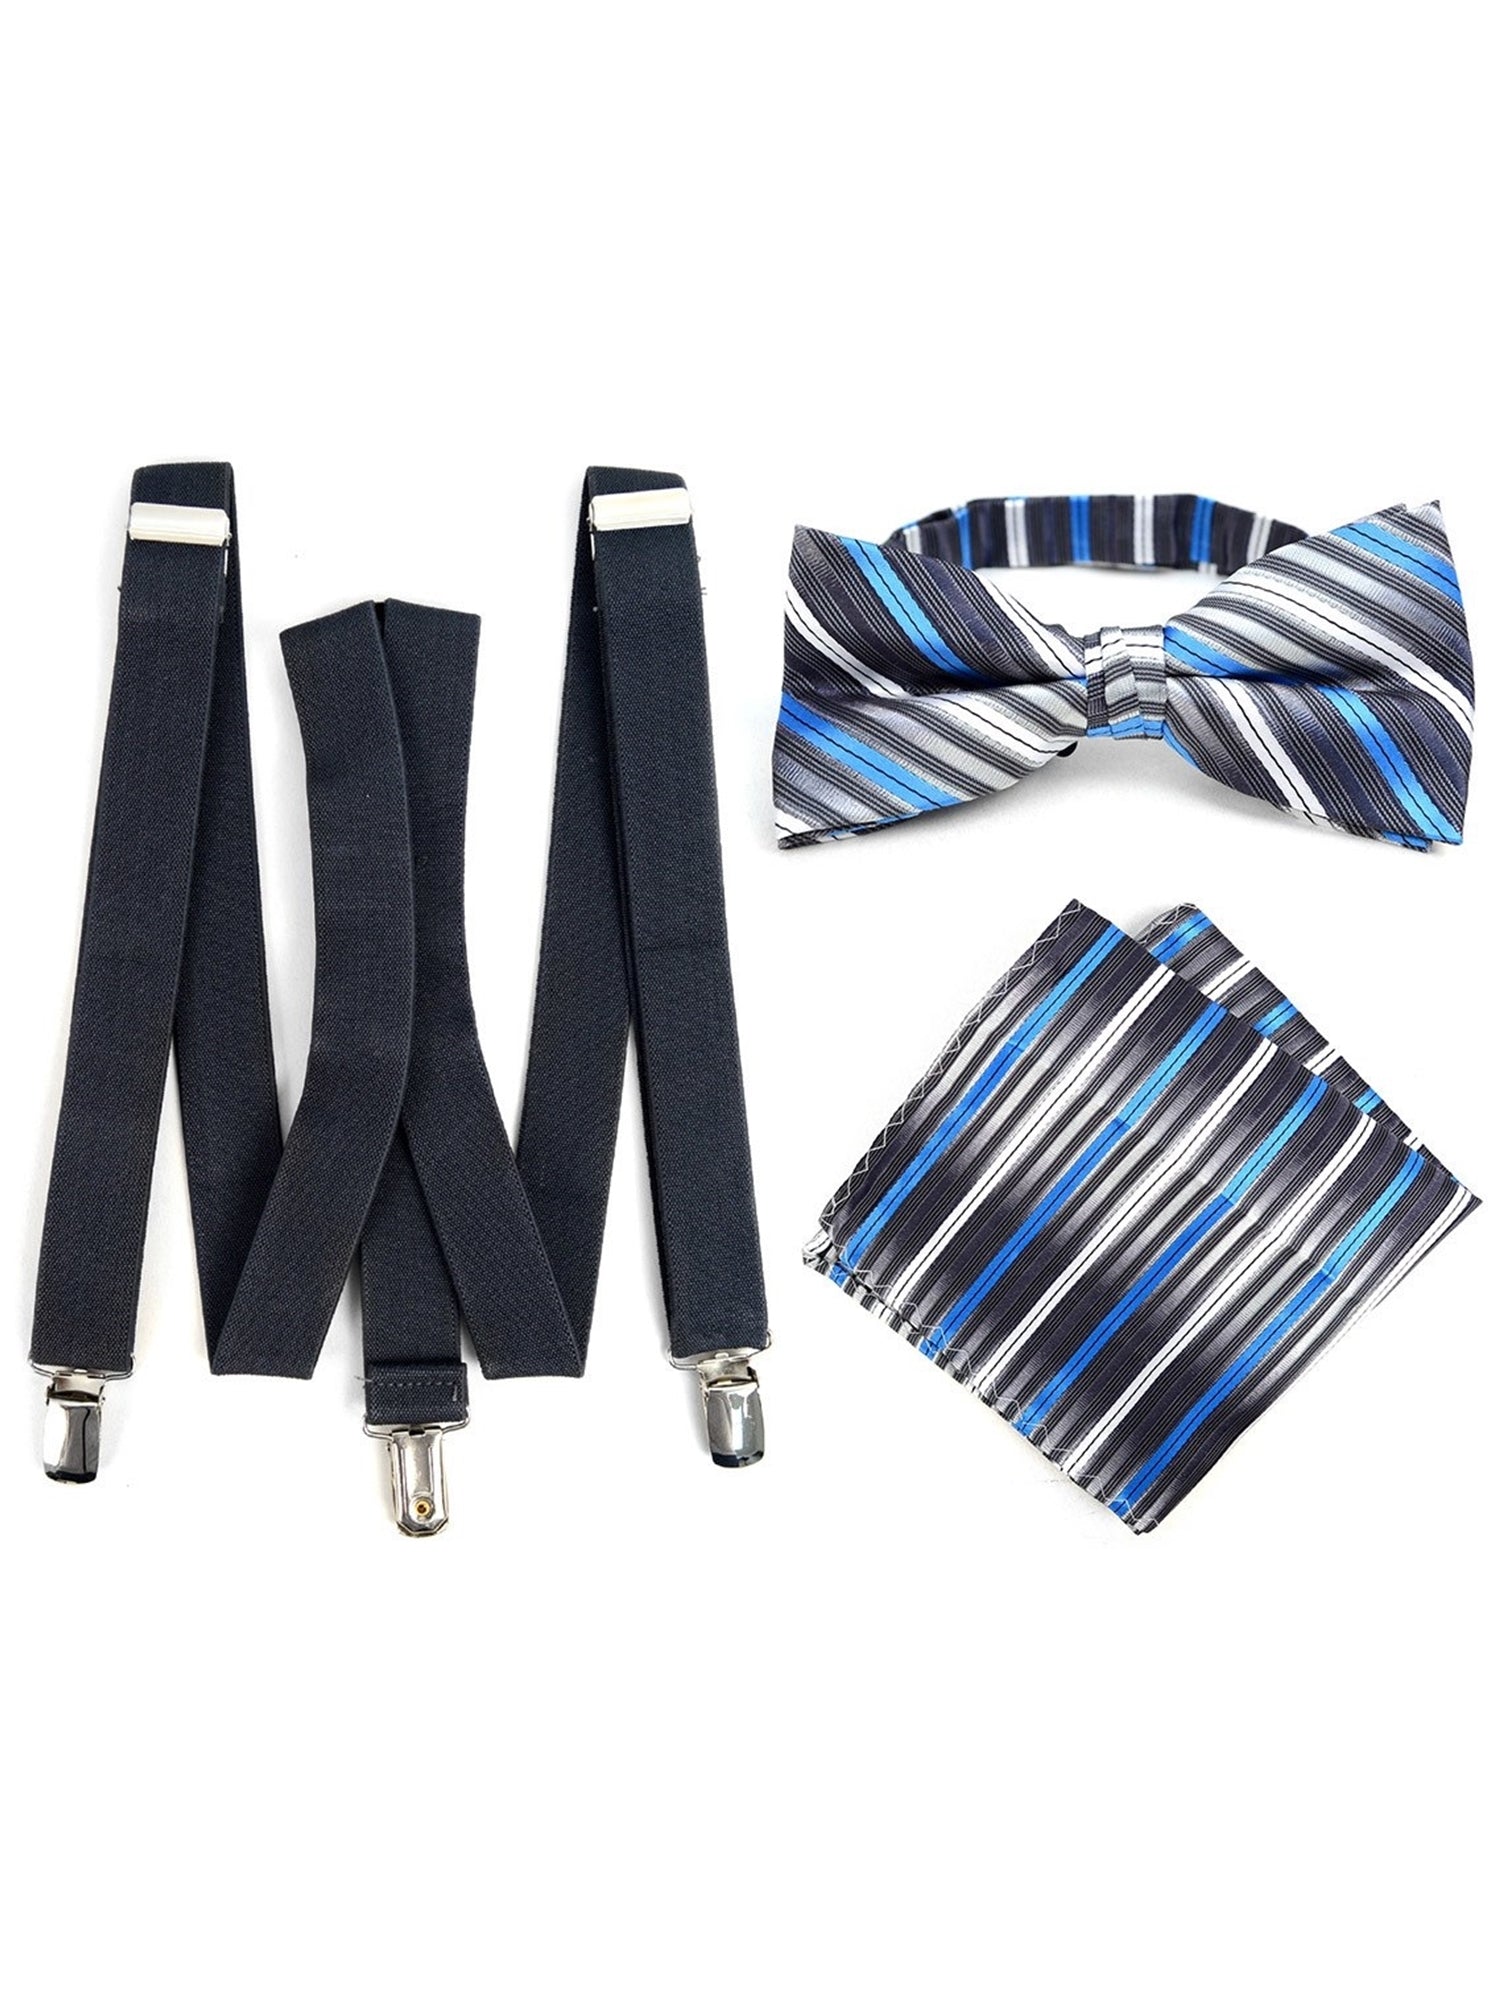 Men's Charcoal 3 PC Clip-on Suspenders, Bow Tie & Hanky Sets Men's Solid Color Bow Tie TheDapperTie Charcoal # 2 Regular 